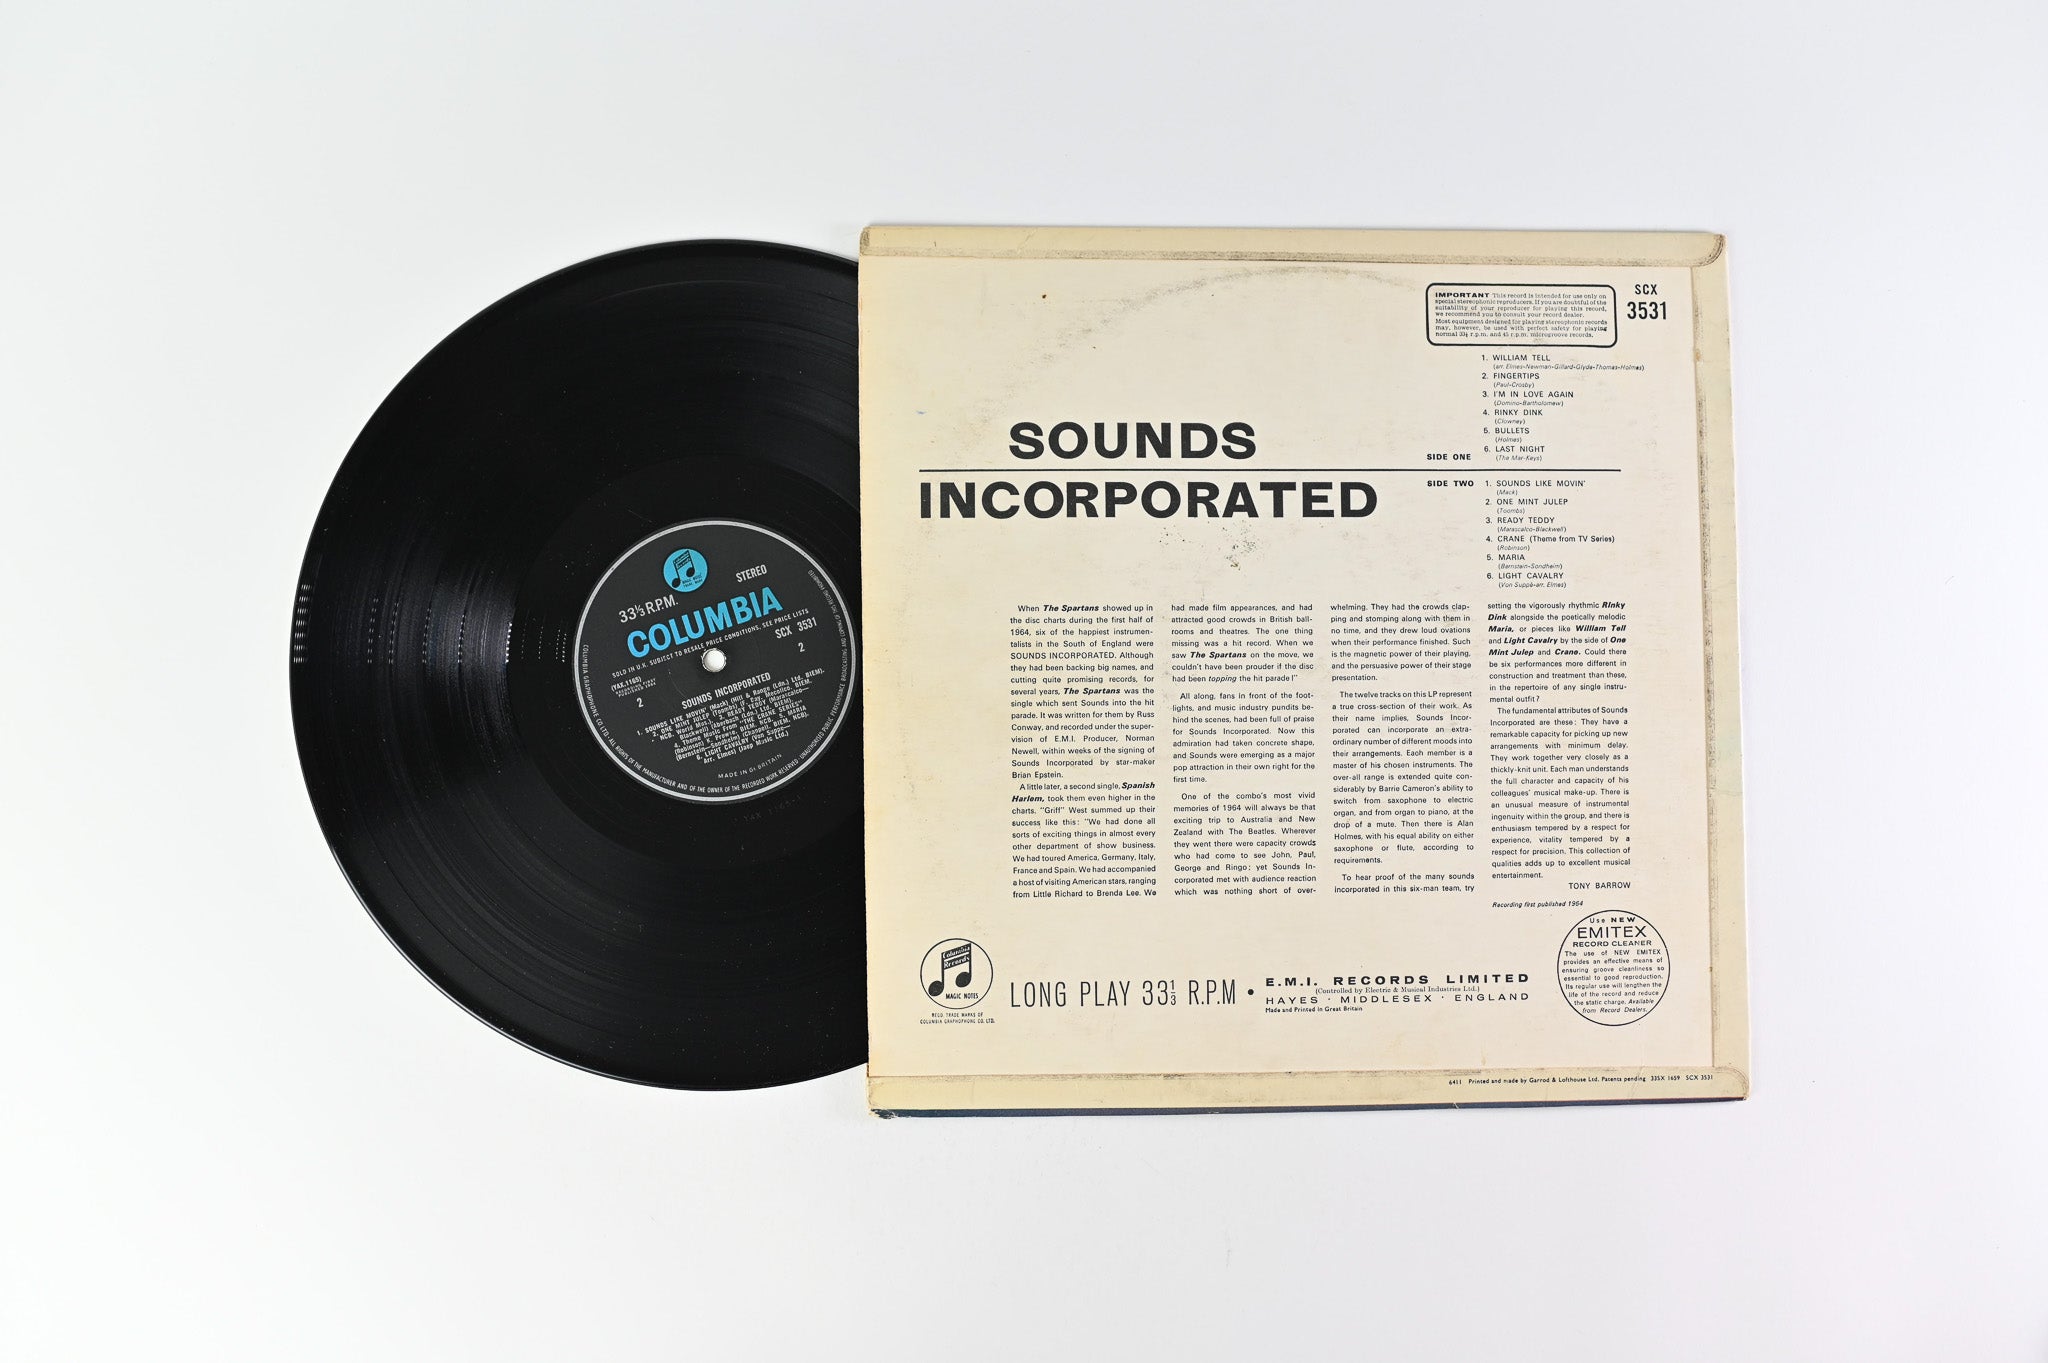 Sounds Incorporated - Sounds Incorporated on Columbia - UK press